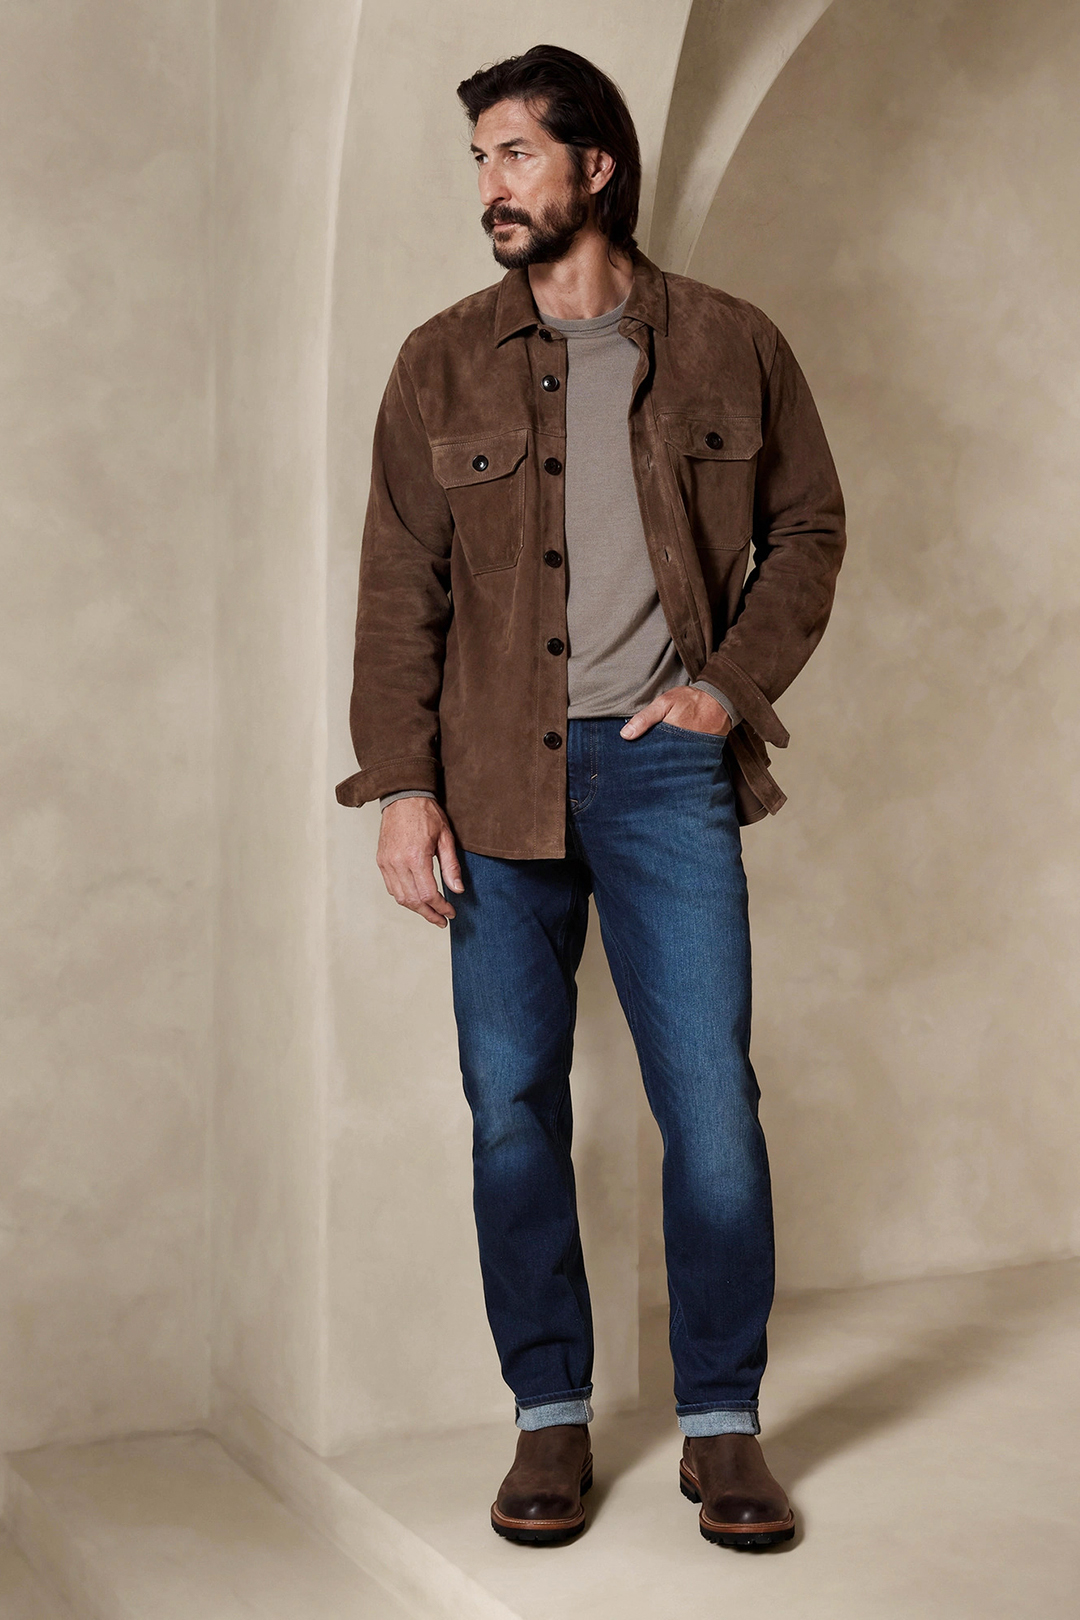 Wear a brown suede jacket, gray crew neck sweater, blue denim jeans, and brown Chelsea boots